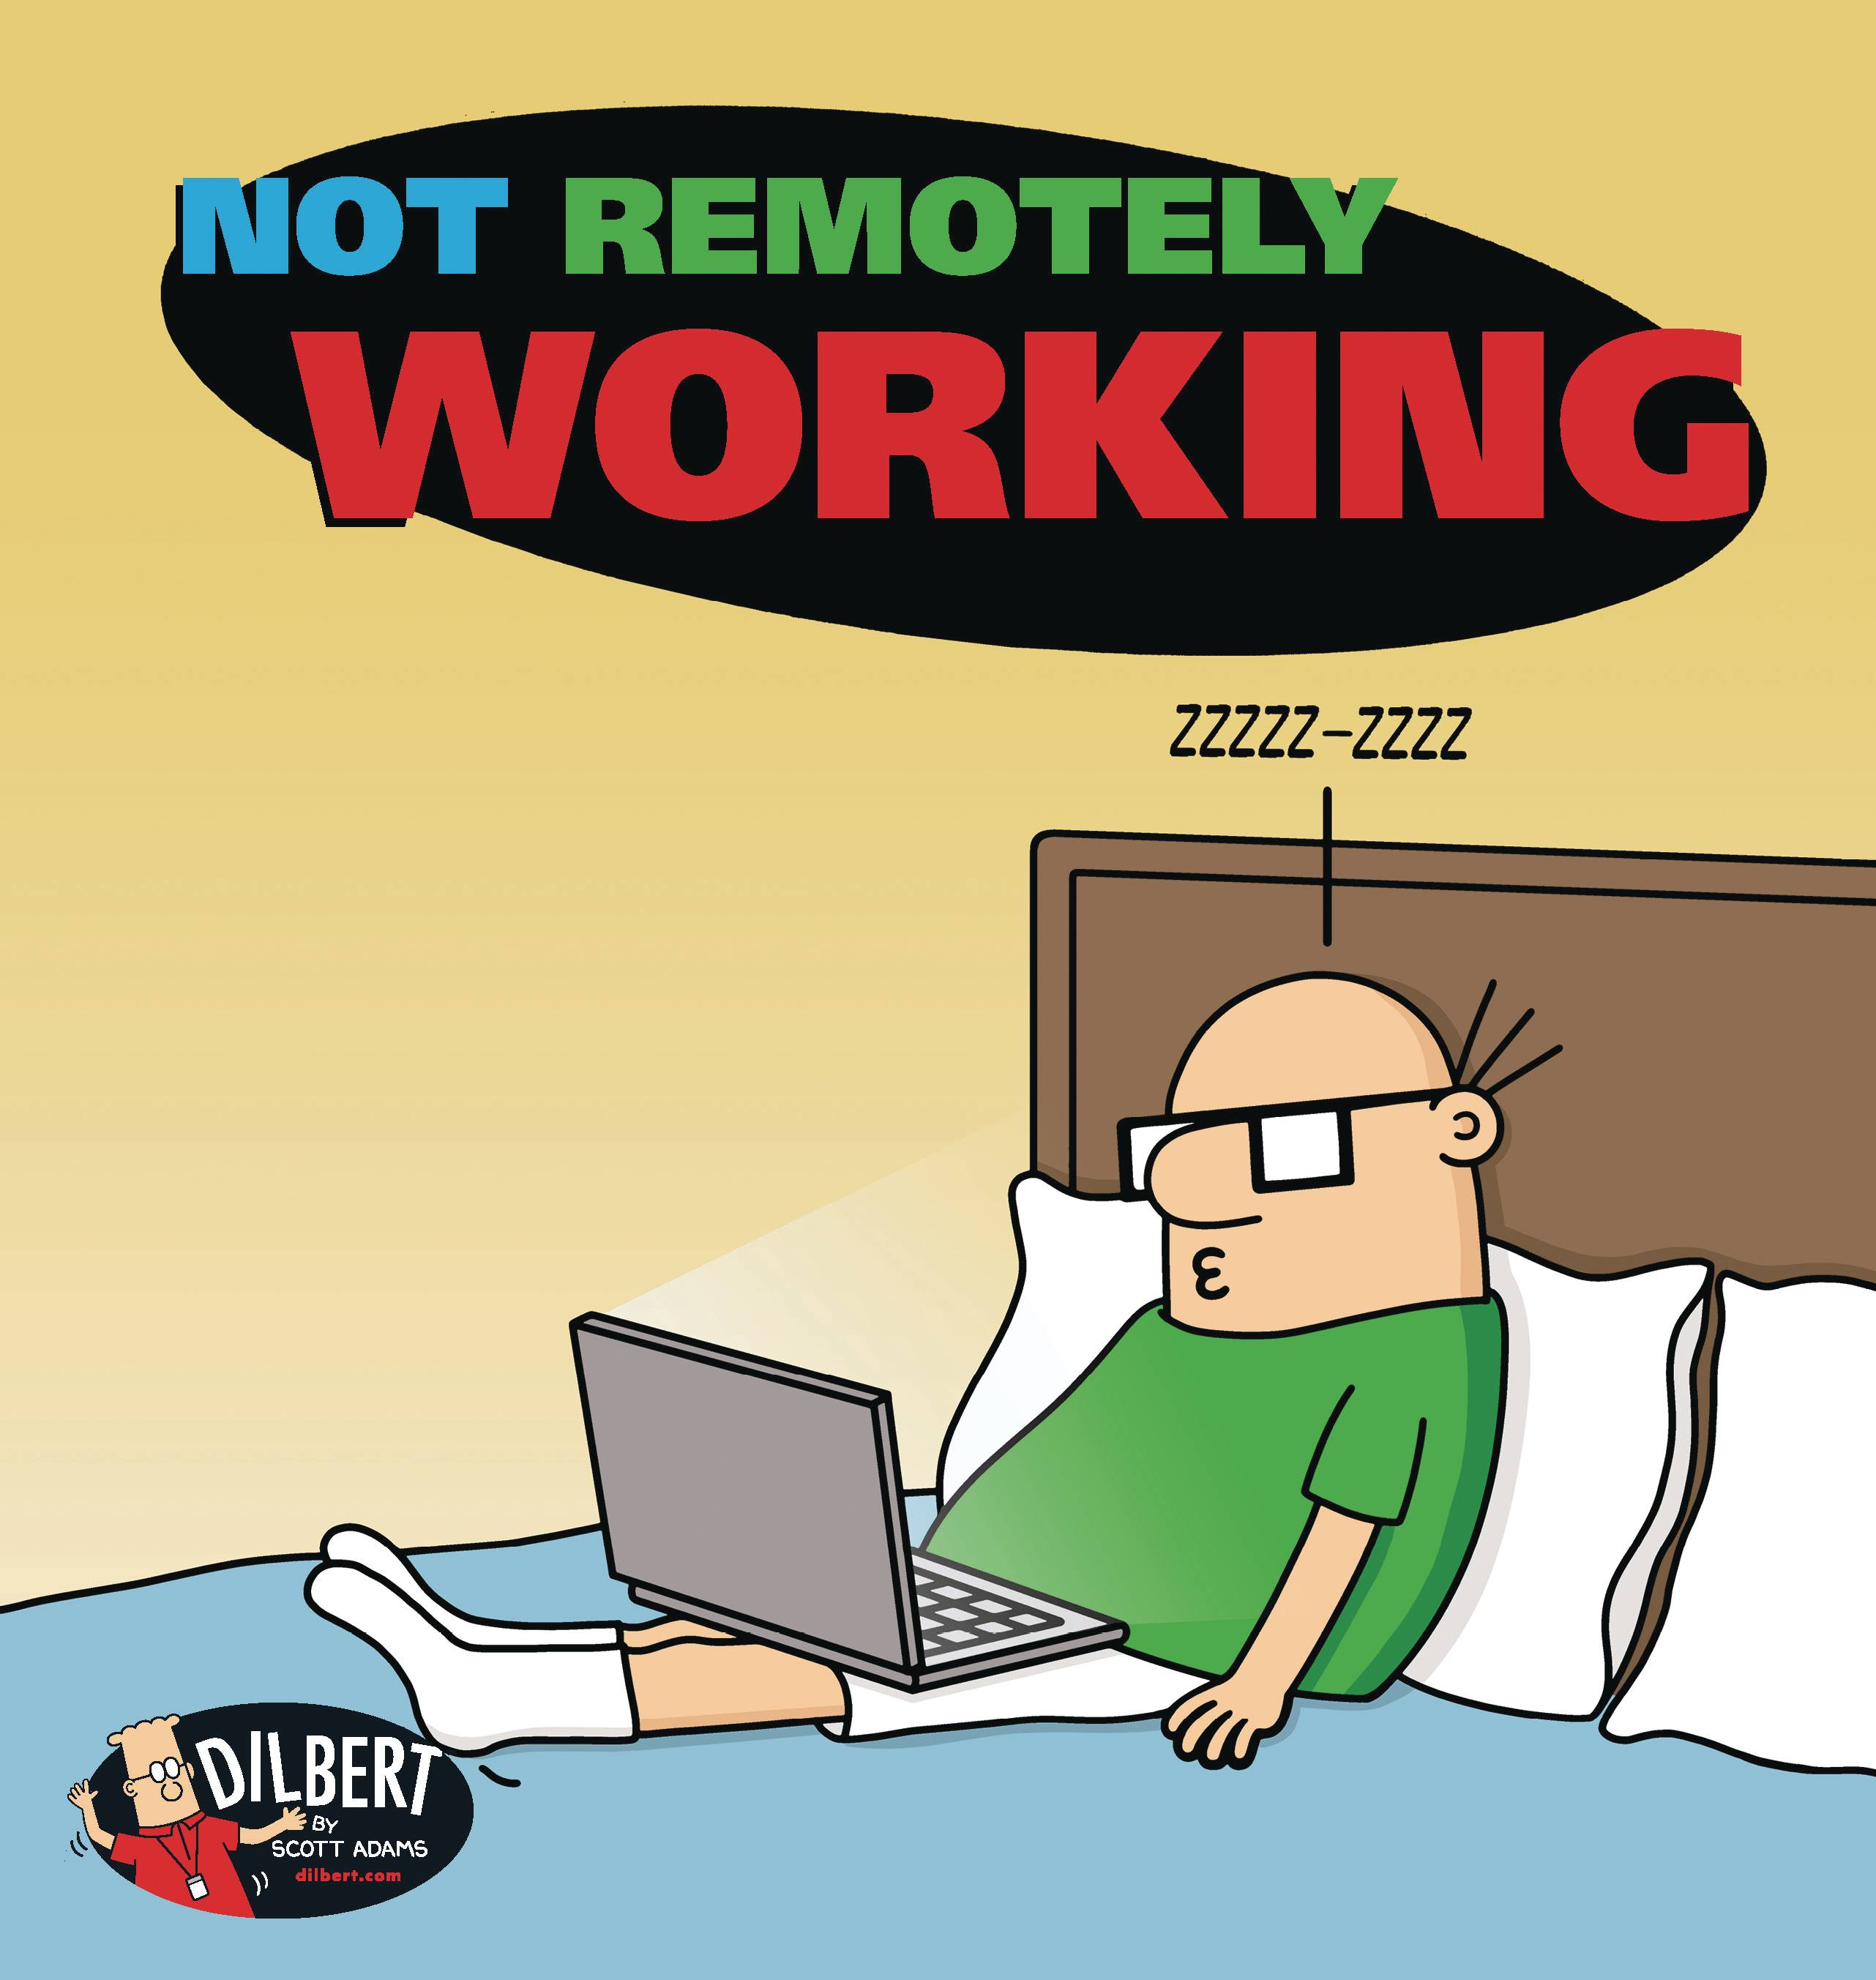 DILBERT TP NOT REMOTELY WORKING